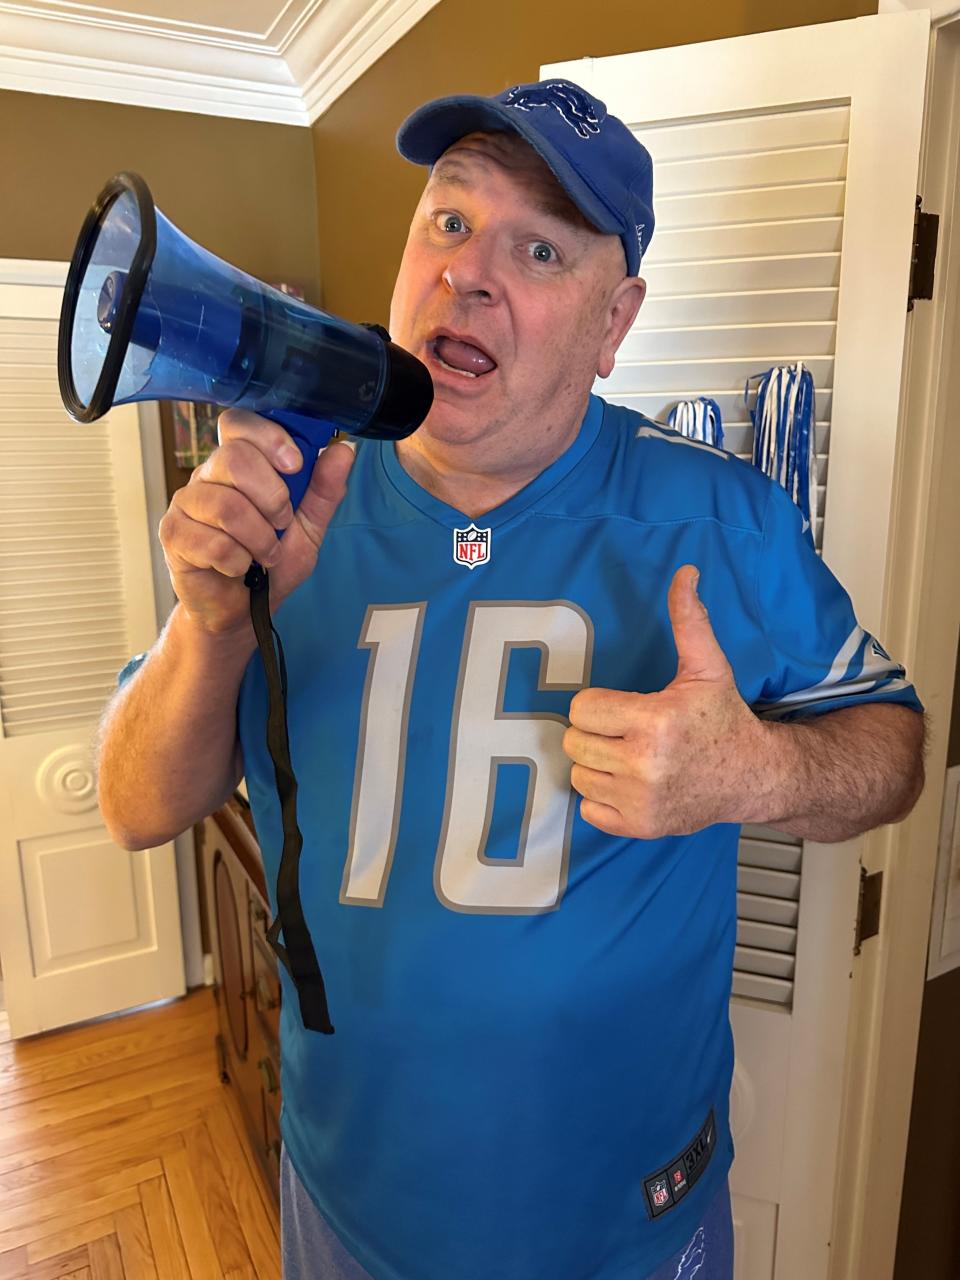 Scott Brown, of Royal Oak, brings his blue megaphone to tailgates at Detroit Lions home games and thanks guests for visiting. Brown has been a longtime fan and has run his own tailgates since the Lions played at the Silverdome.